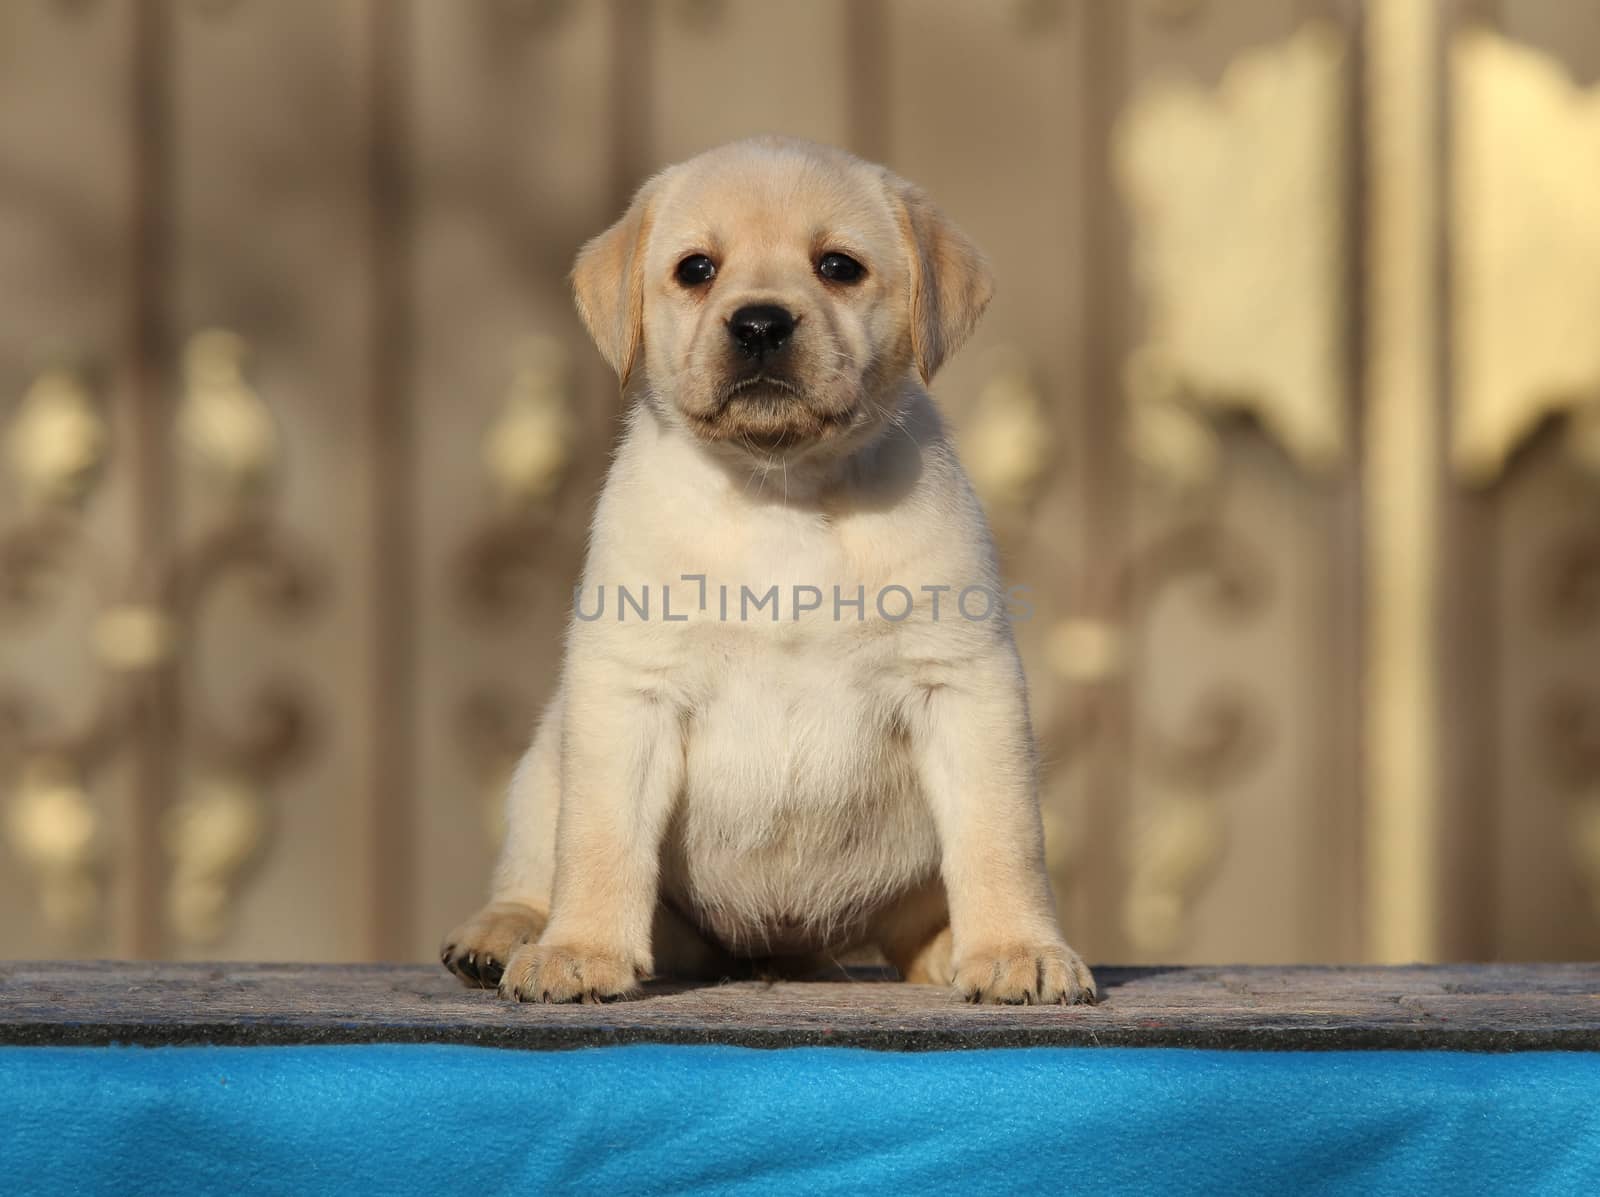 the little labrador puppy on a blue background